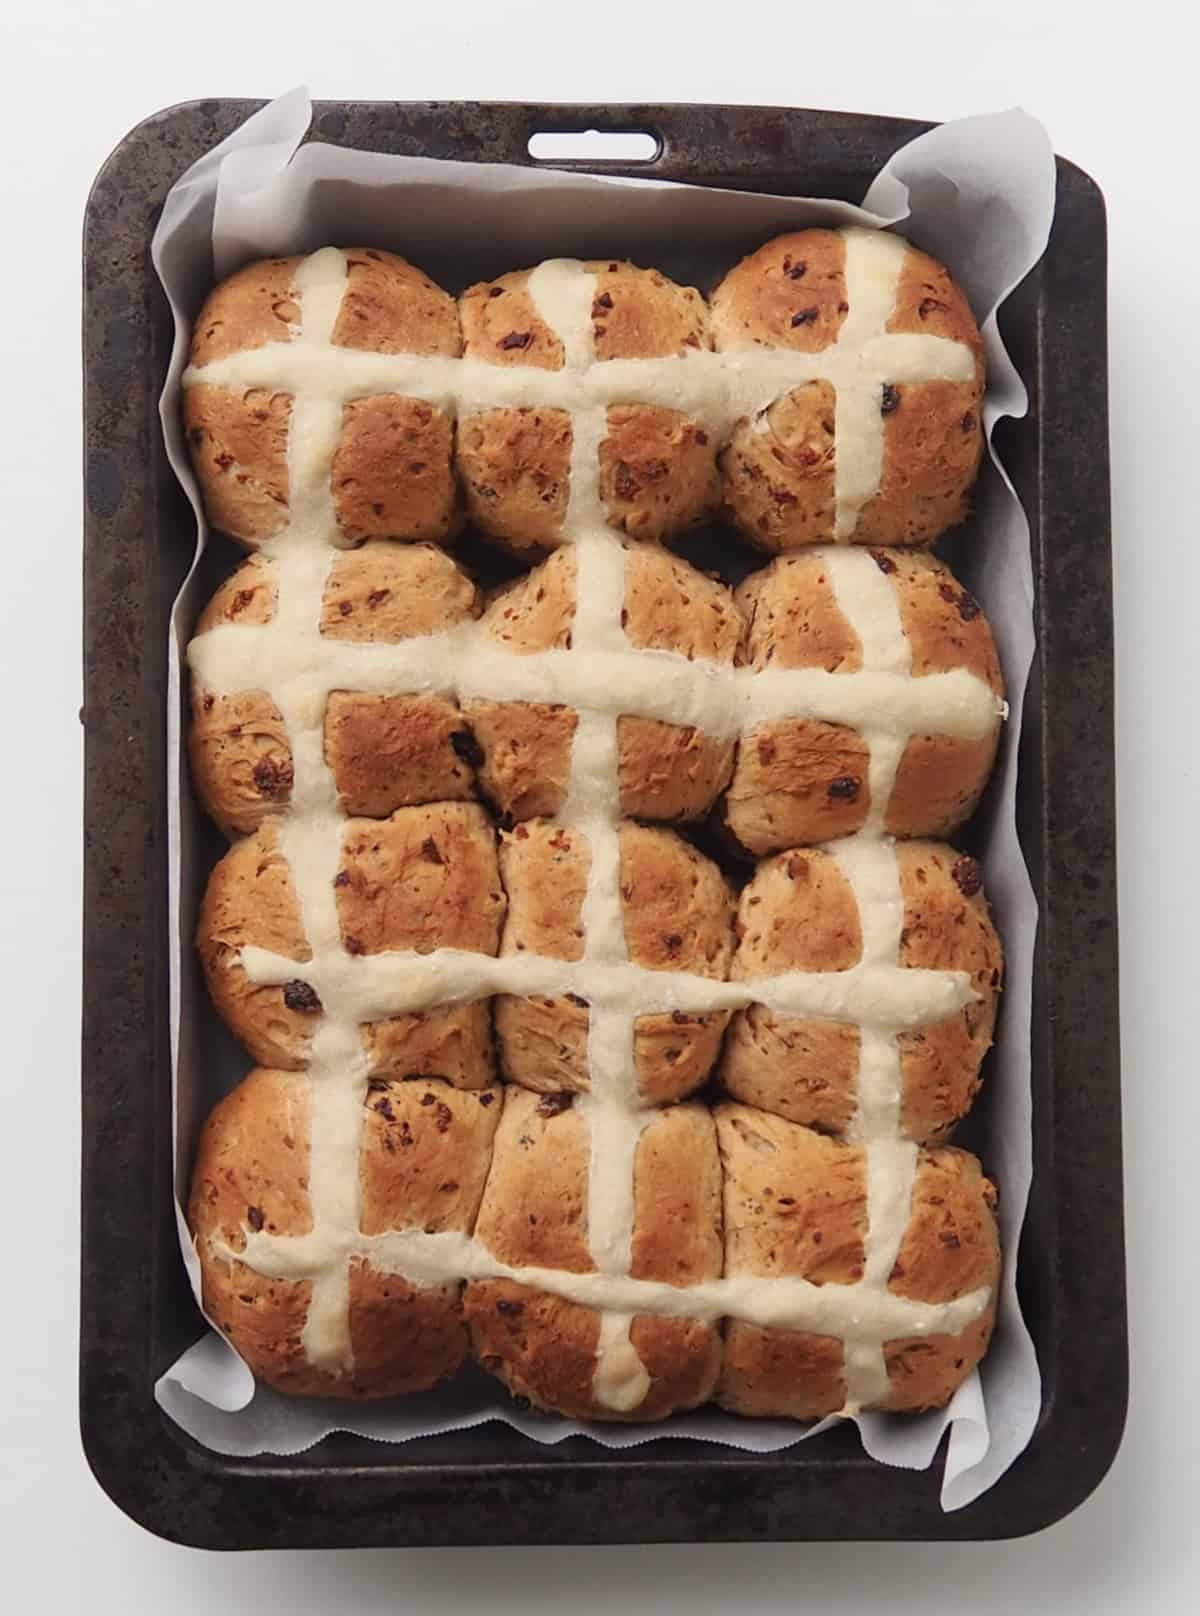 Unglazed Hot Cross Buns straight from the oven.